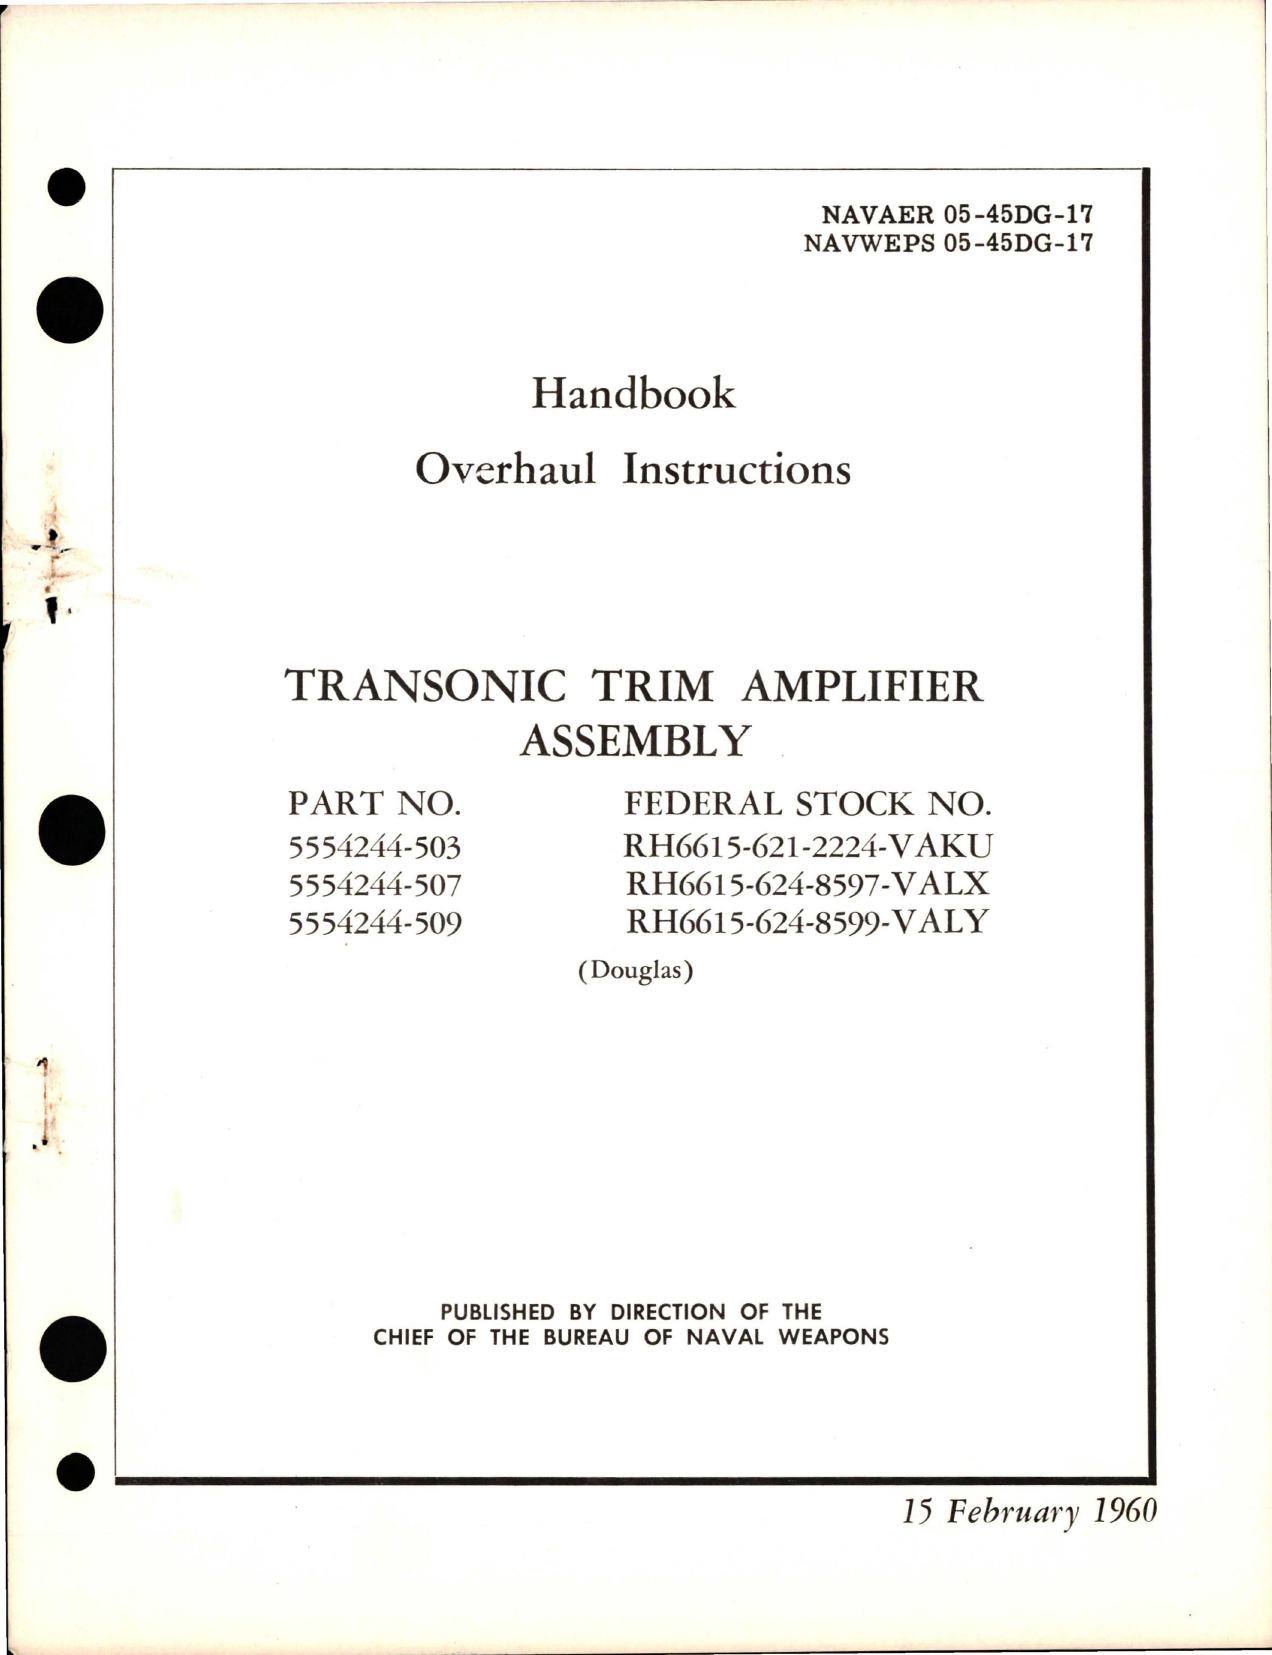 Sample page 1 from AirCorps Library document: Overhaul Instructions for Transonic Trim Amplifier Assembly - Parts 5554244-503, 5554244-507, and 554244-509